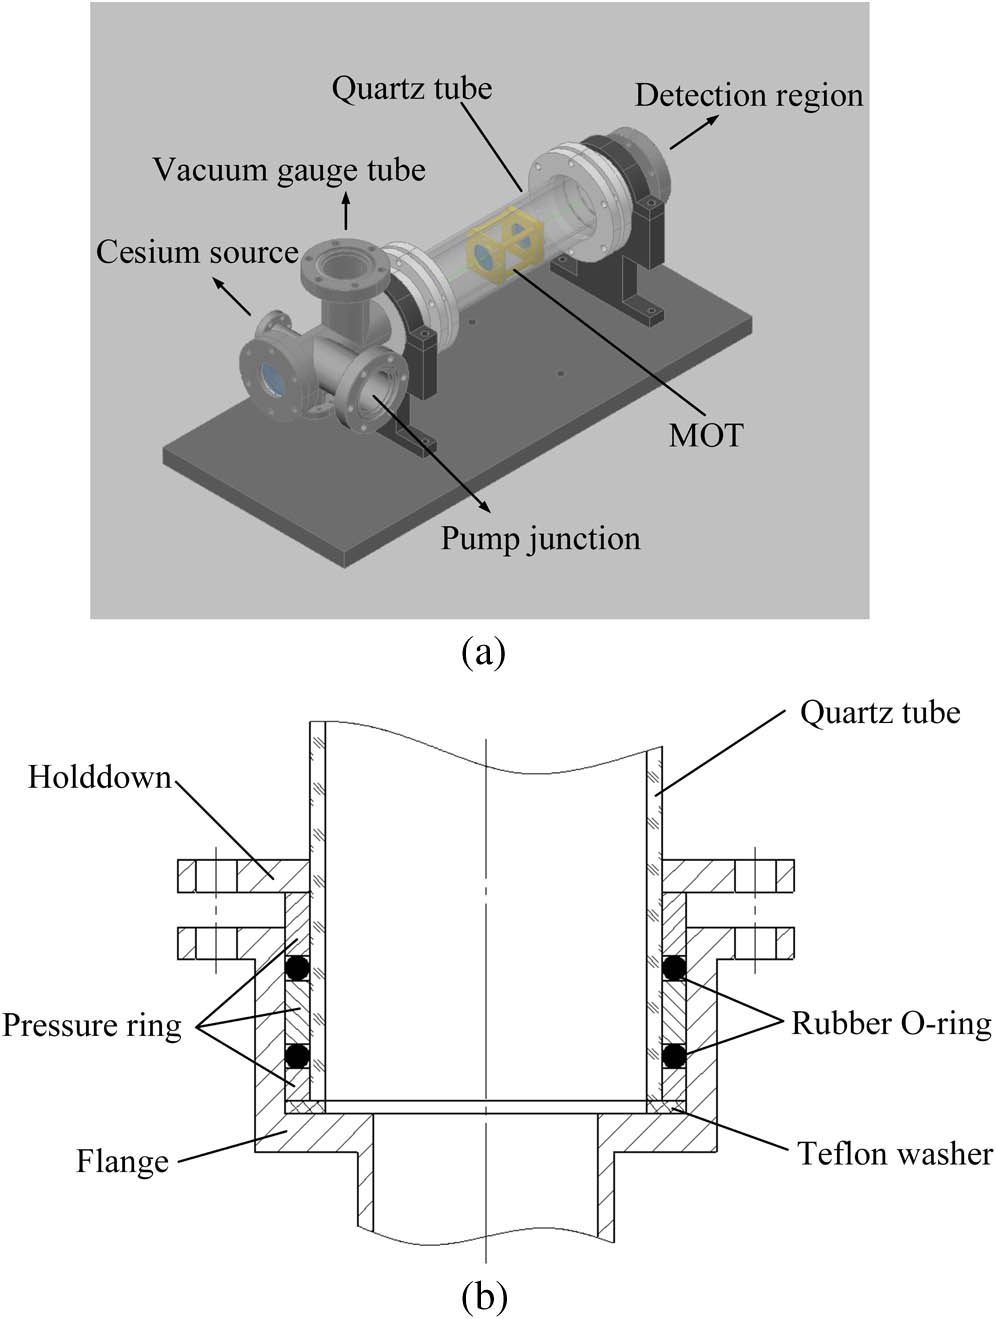 (a) Three-dimensional view of the transparent MOT system. (b) Section view of the vacuum sealing arrangement.